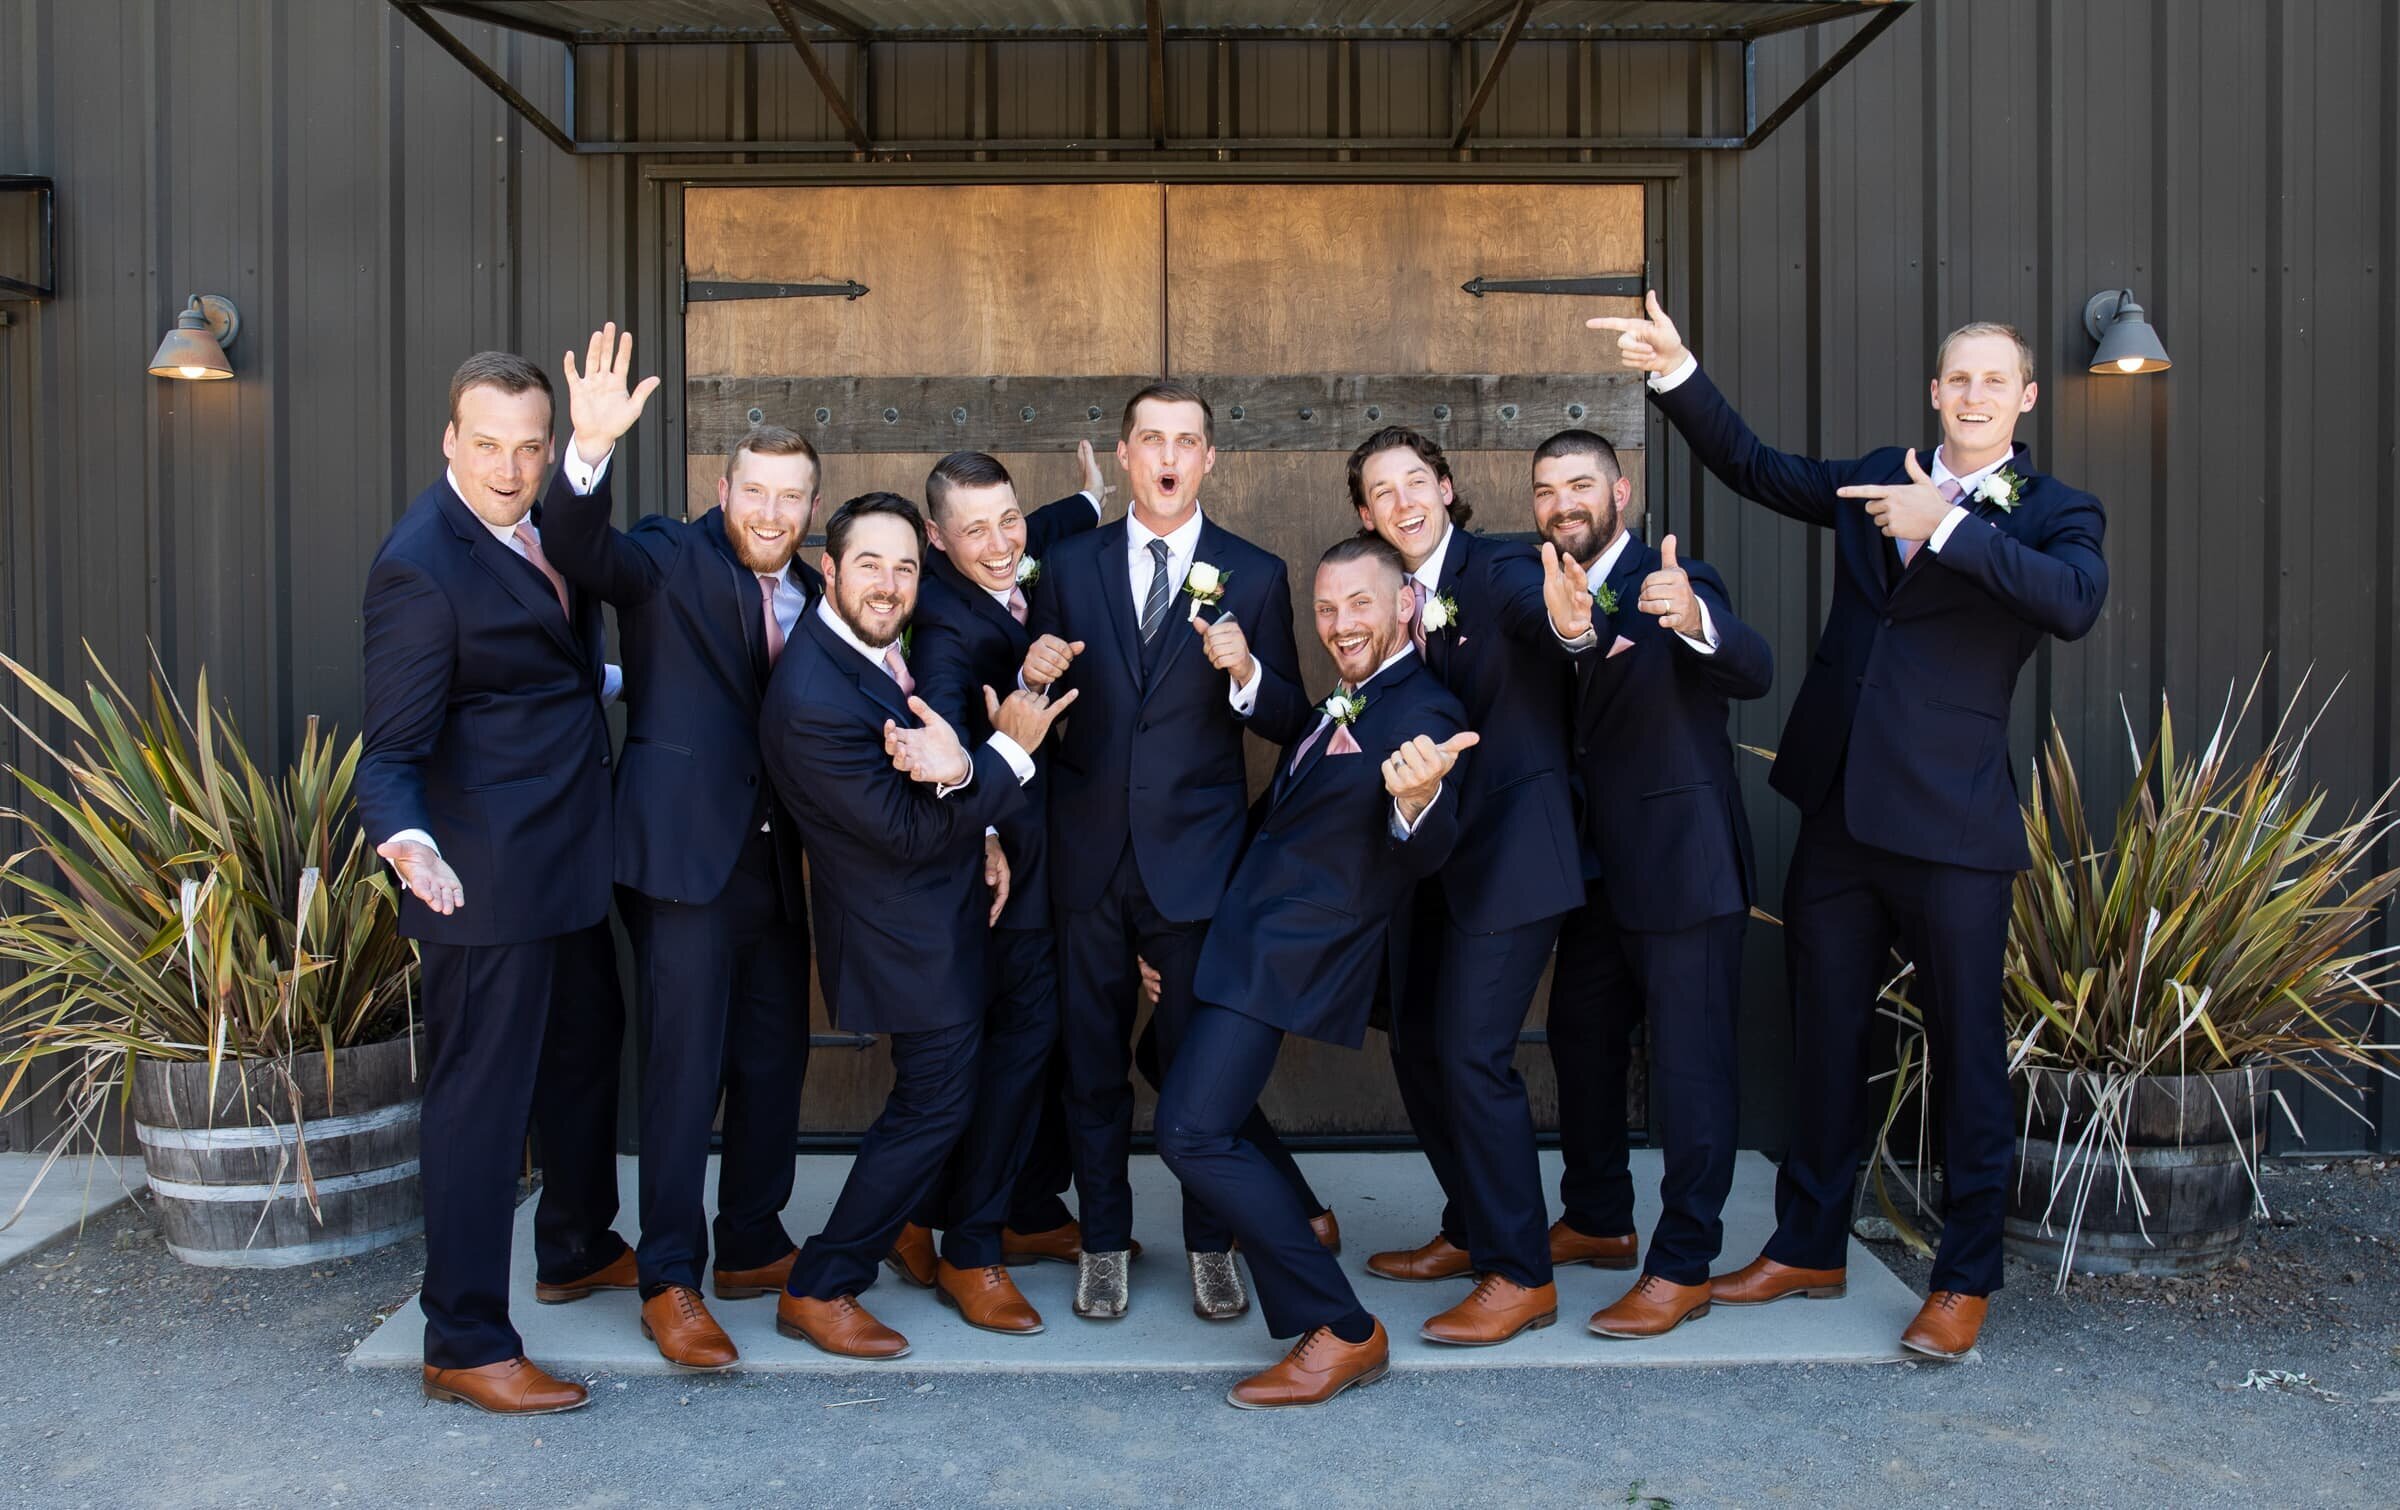 groom and groomsmen being silly during wedding party portraits on a wedding day.